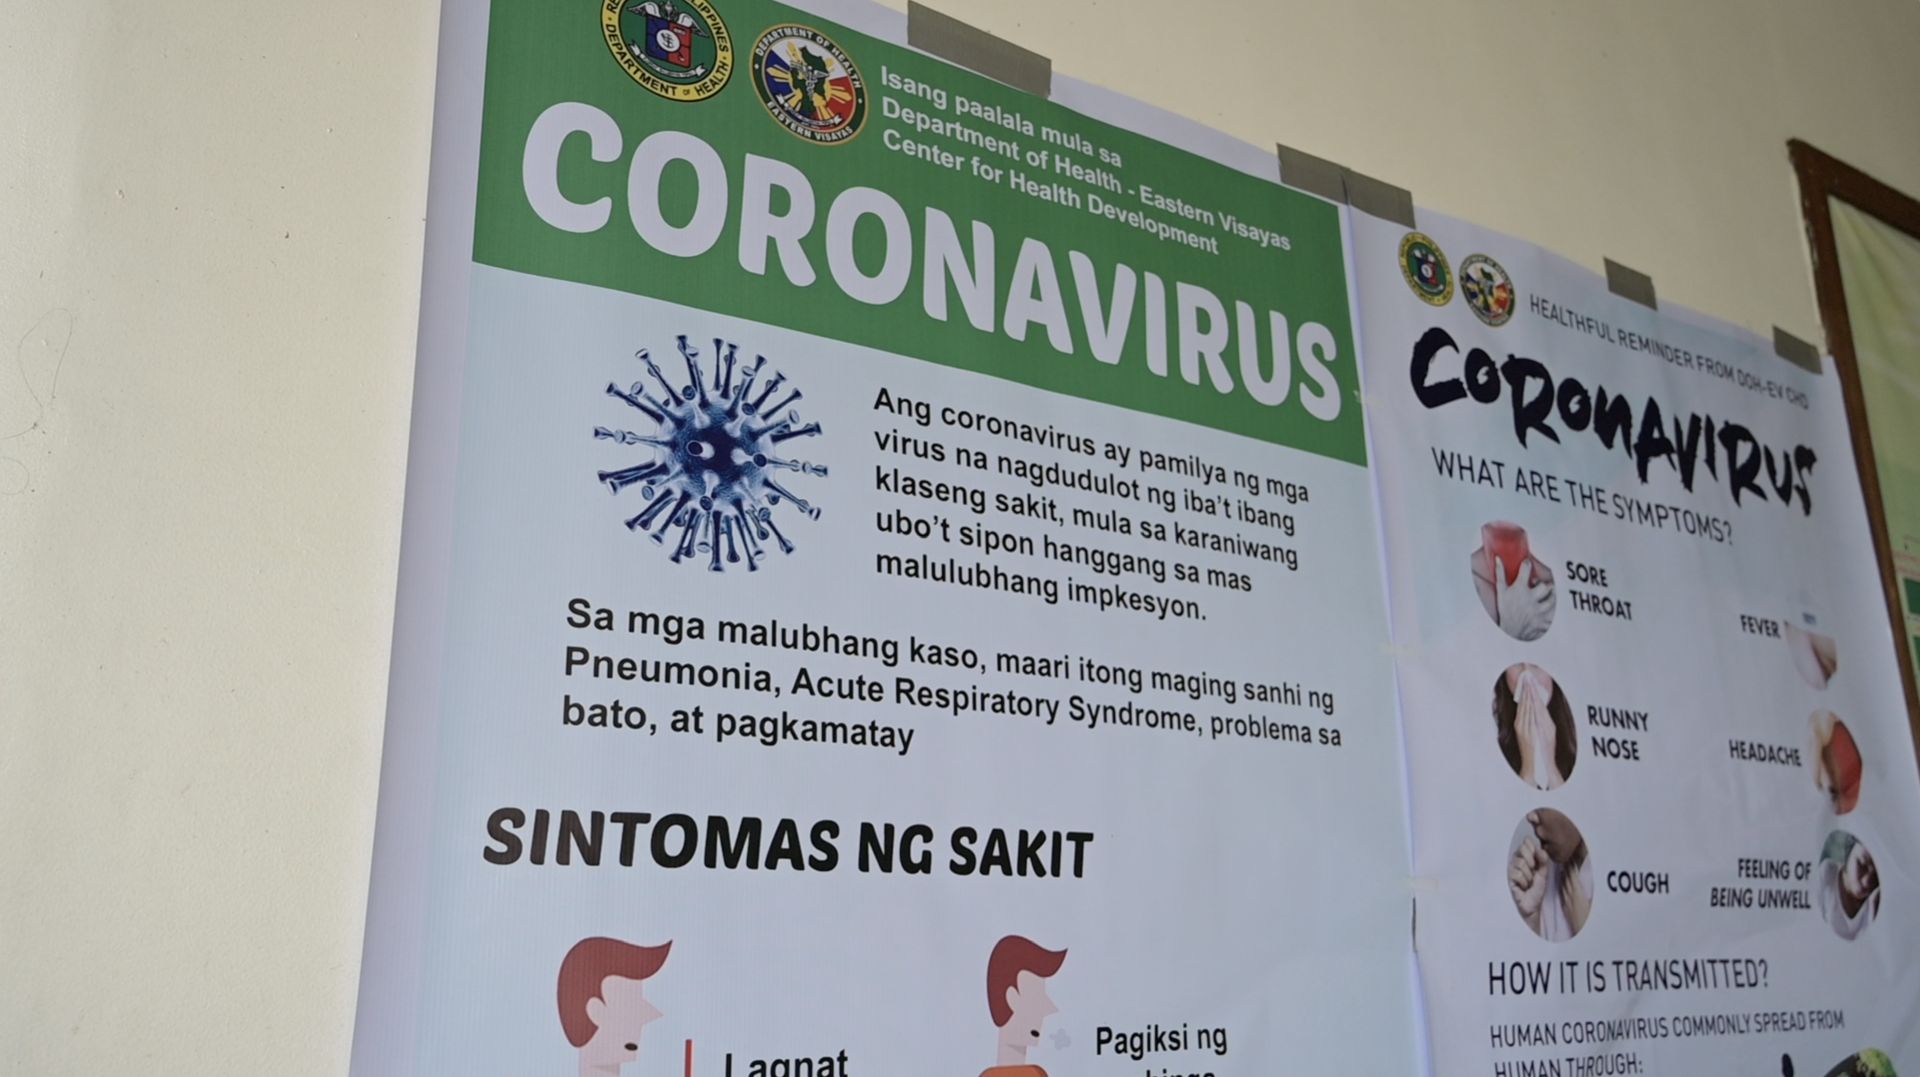 Posters at health facilities provide public information about the coronavirus